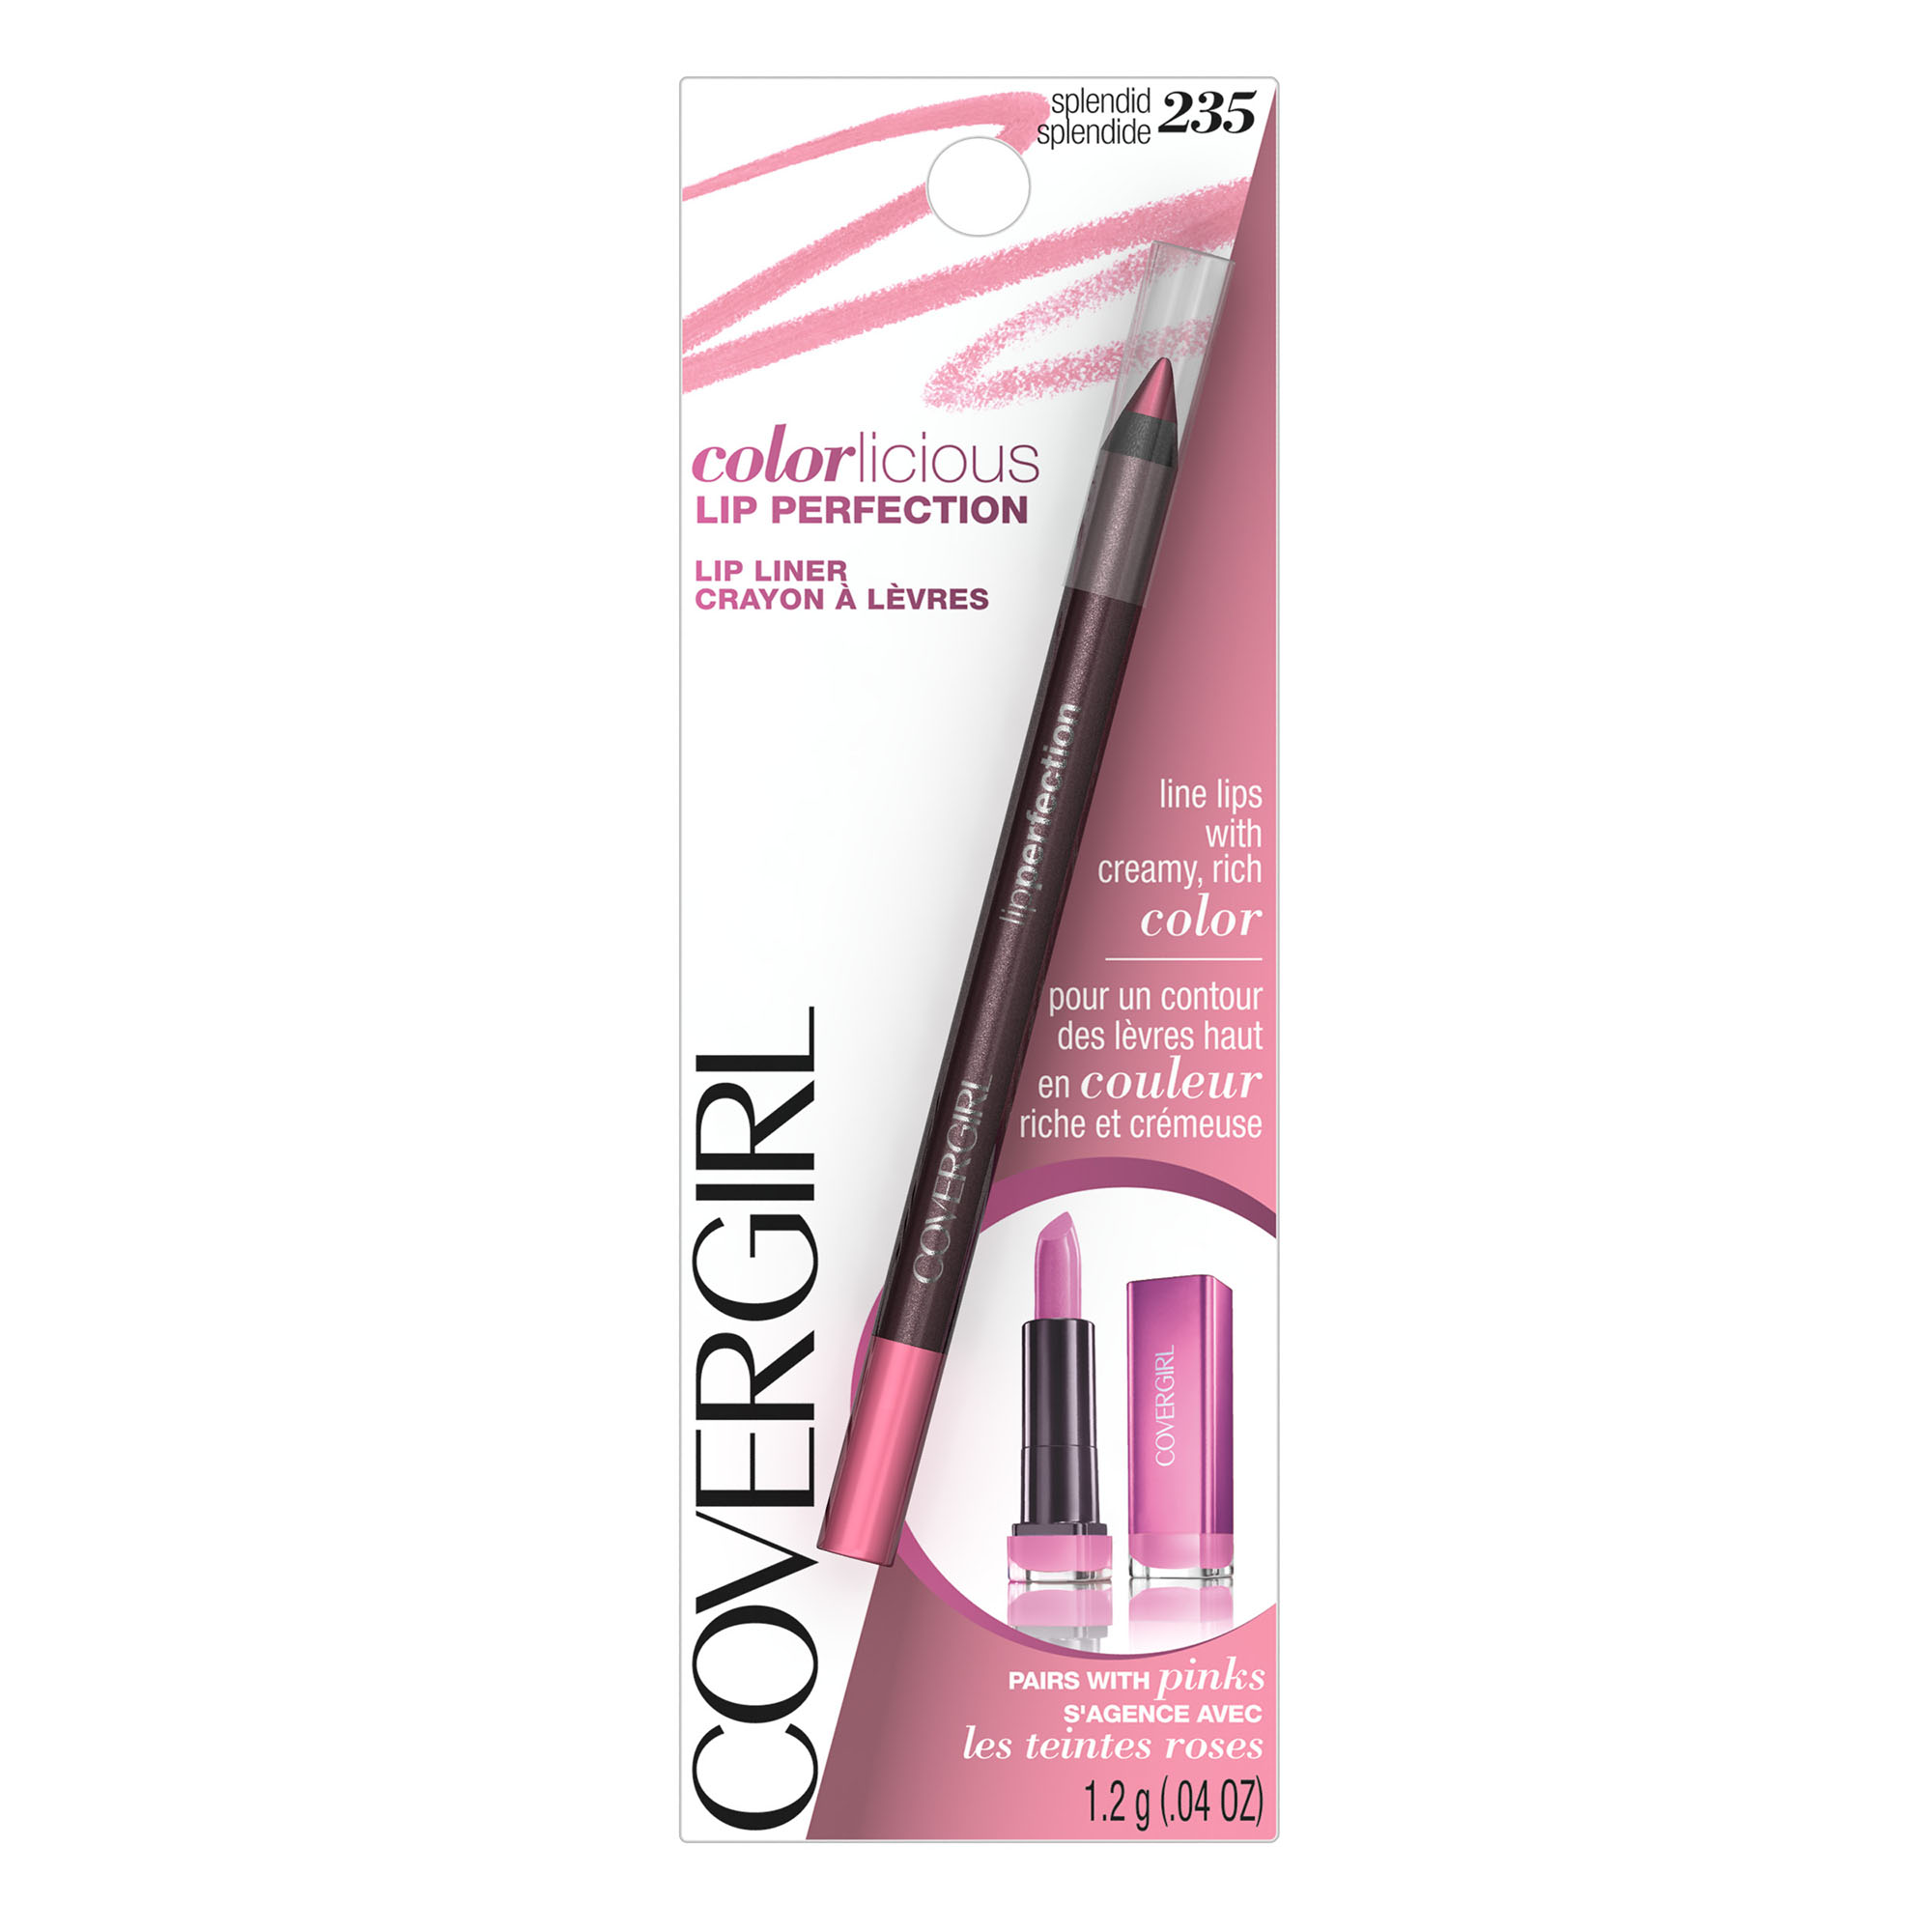 COVERGIRL Colorlicious Lip Perfection Lip Liner, Splendid - image 3 of 4